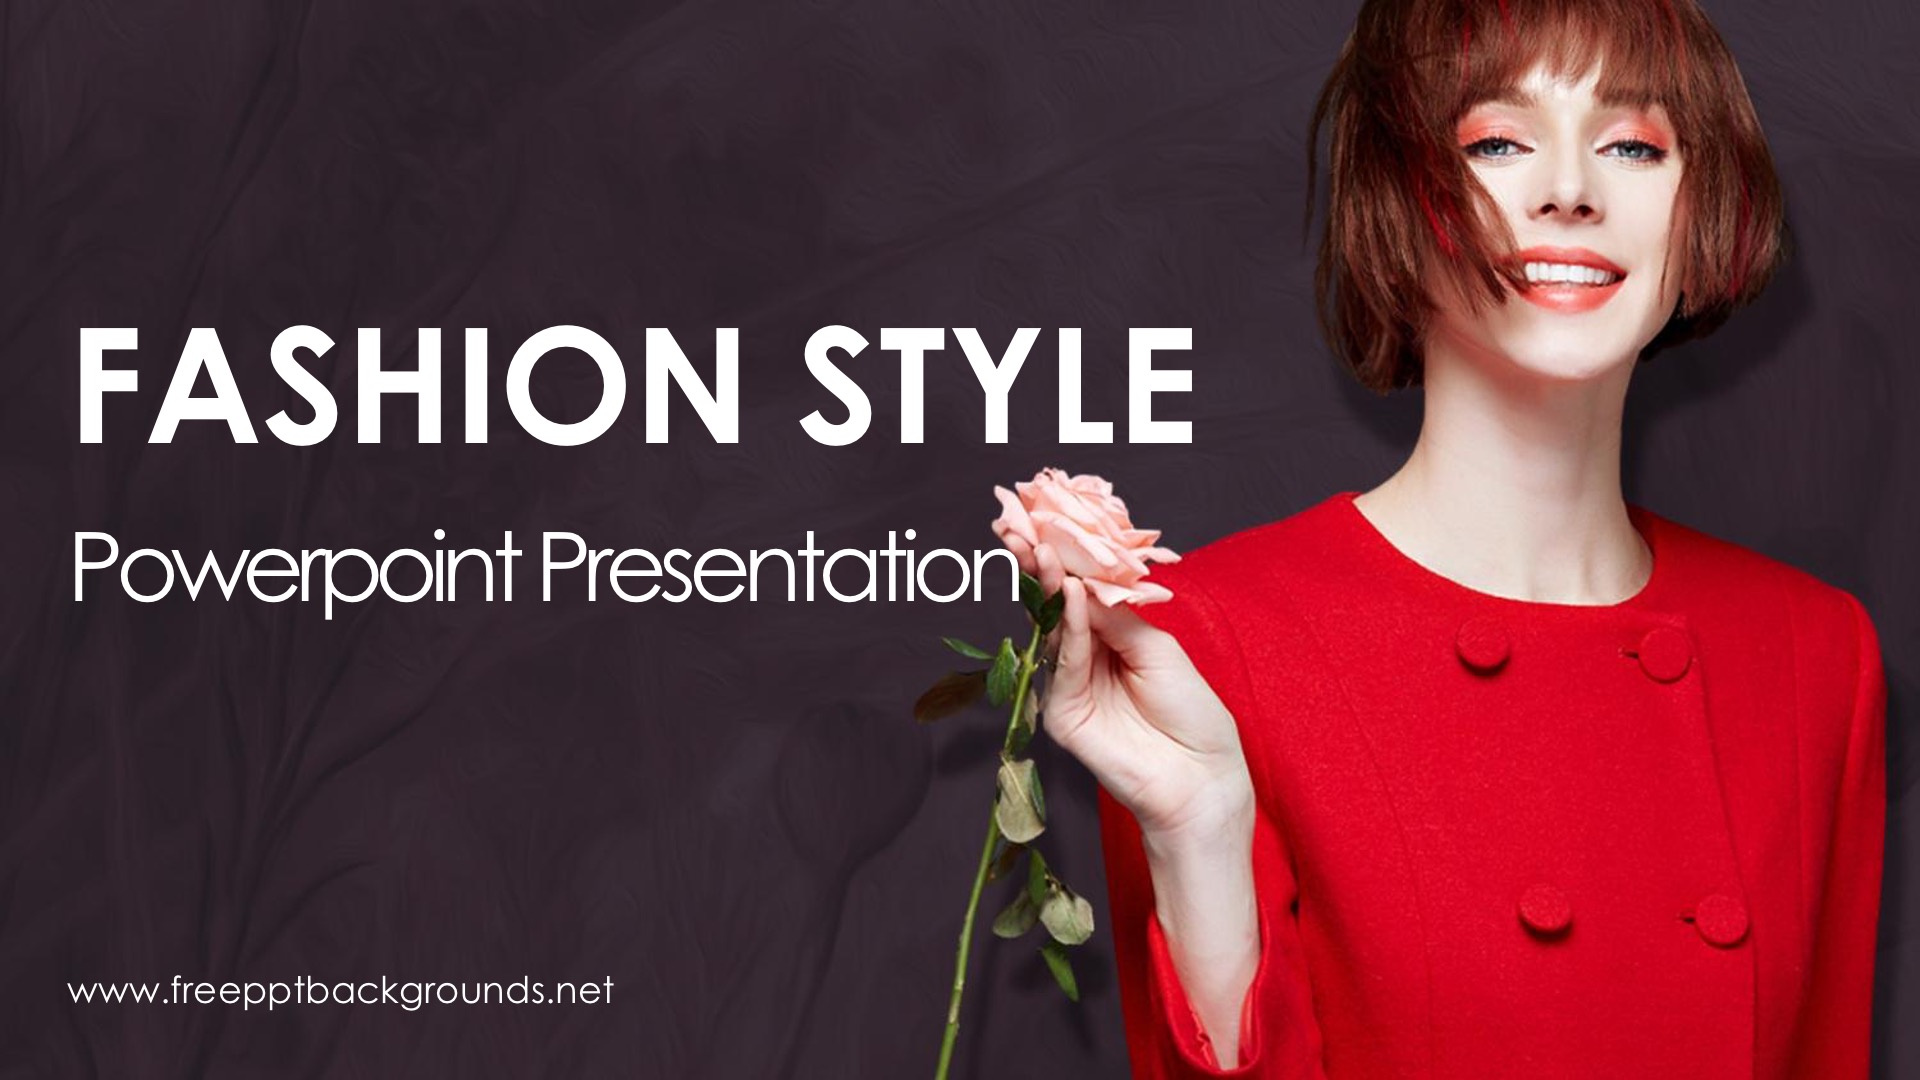 Fashion Style Powerpoint Templates - Beauty & Fashion, Black, Google  Slides, Red - Free PPT Backgrounds and Templates